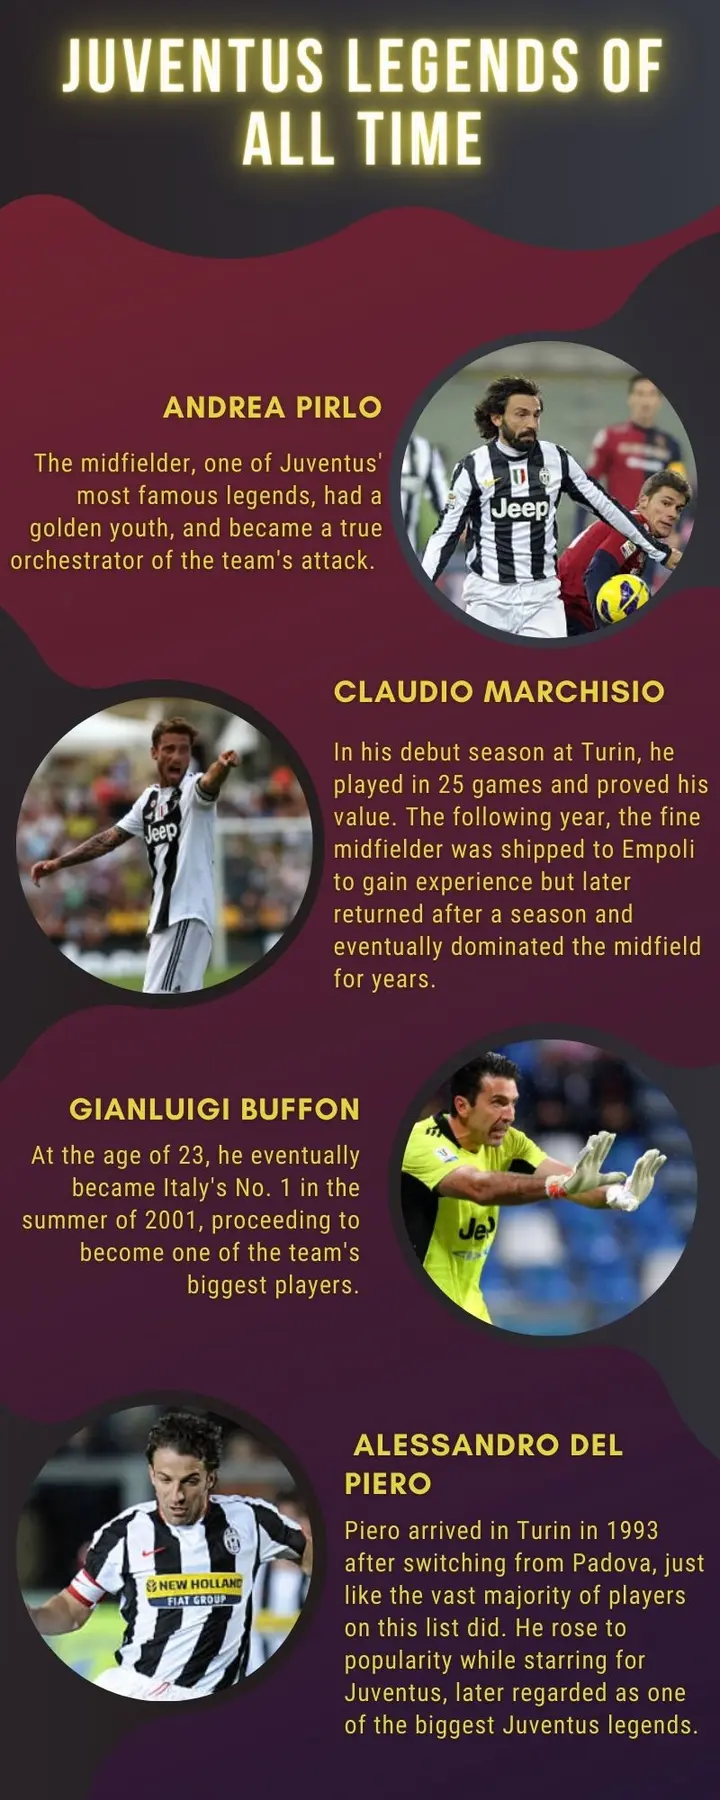 Juventus legends of all time